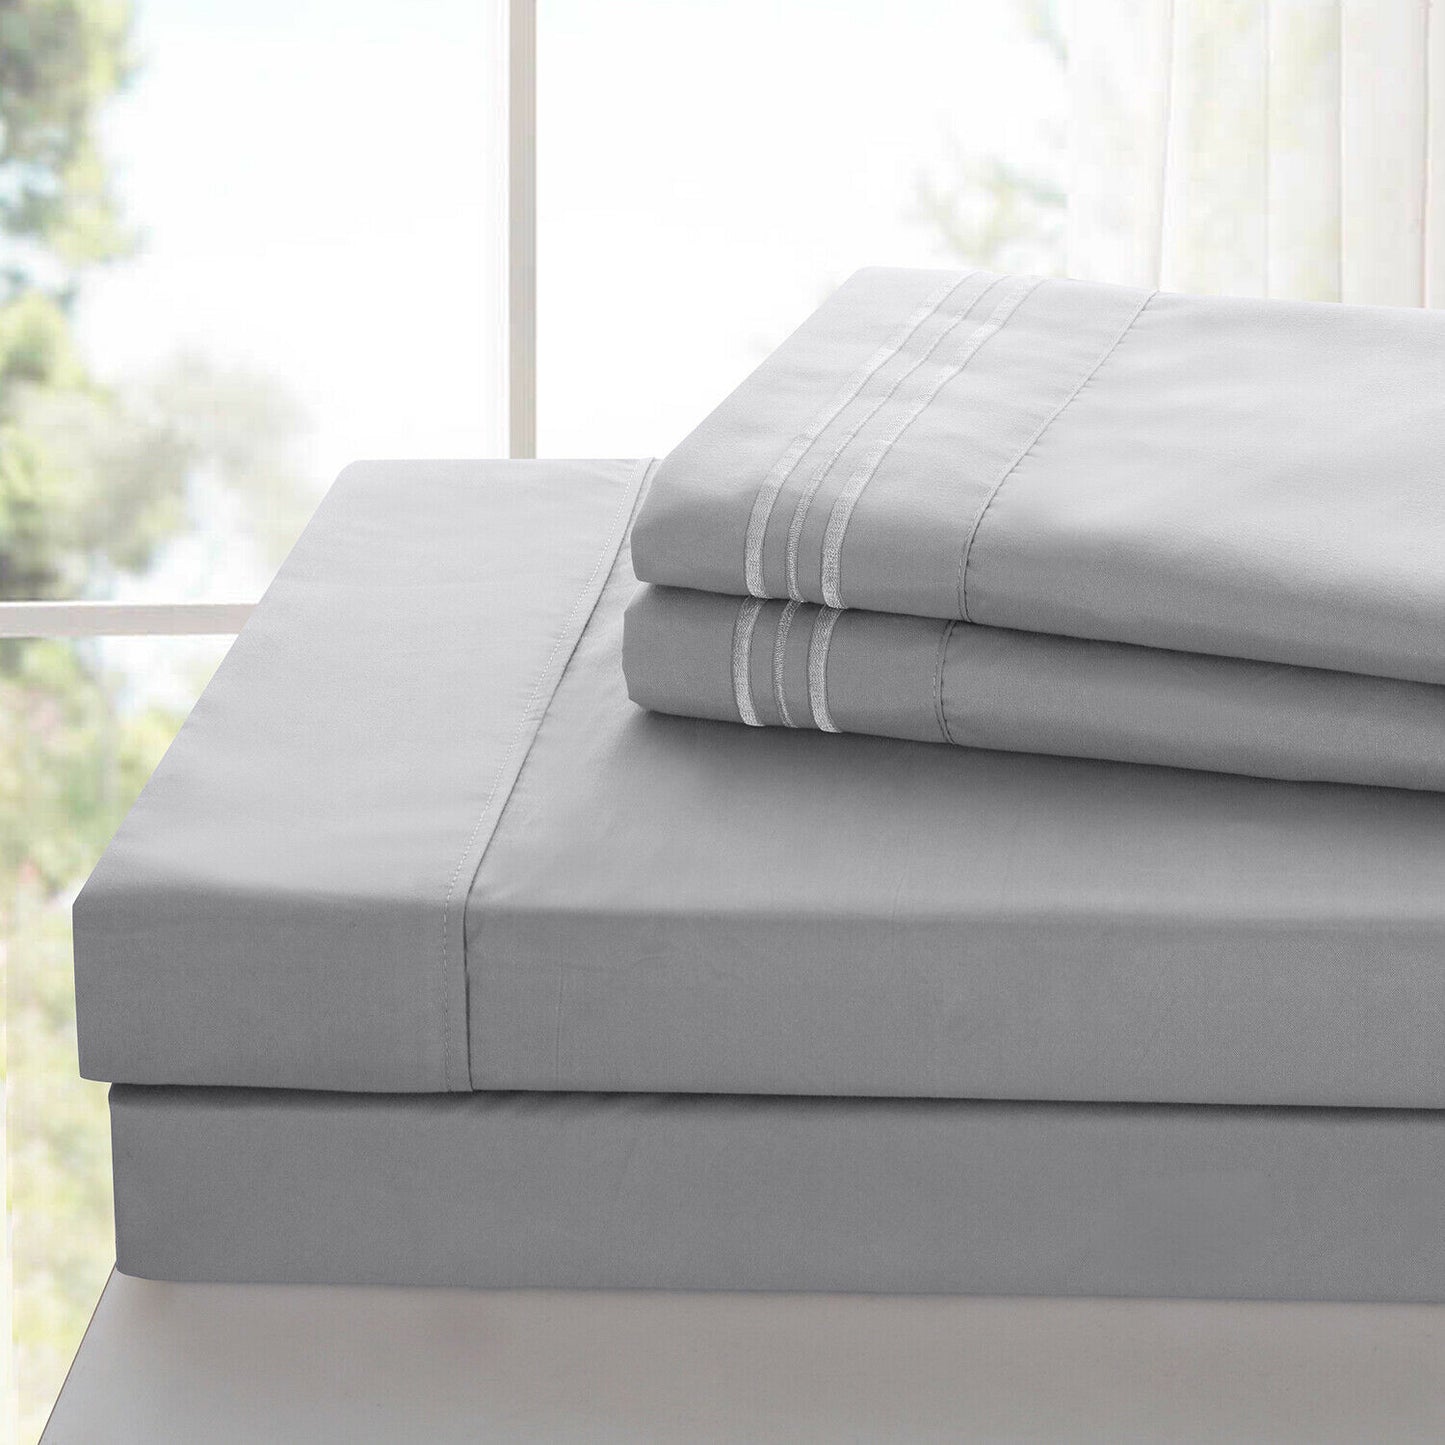 Luxury Ultra-Soft Bed Sheet Set | Hypoallergenic-Deep Pockets-Fade,Wrinkle,Stain Resistant-1800 Thread Count-4 Pieces